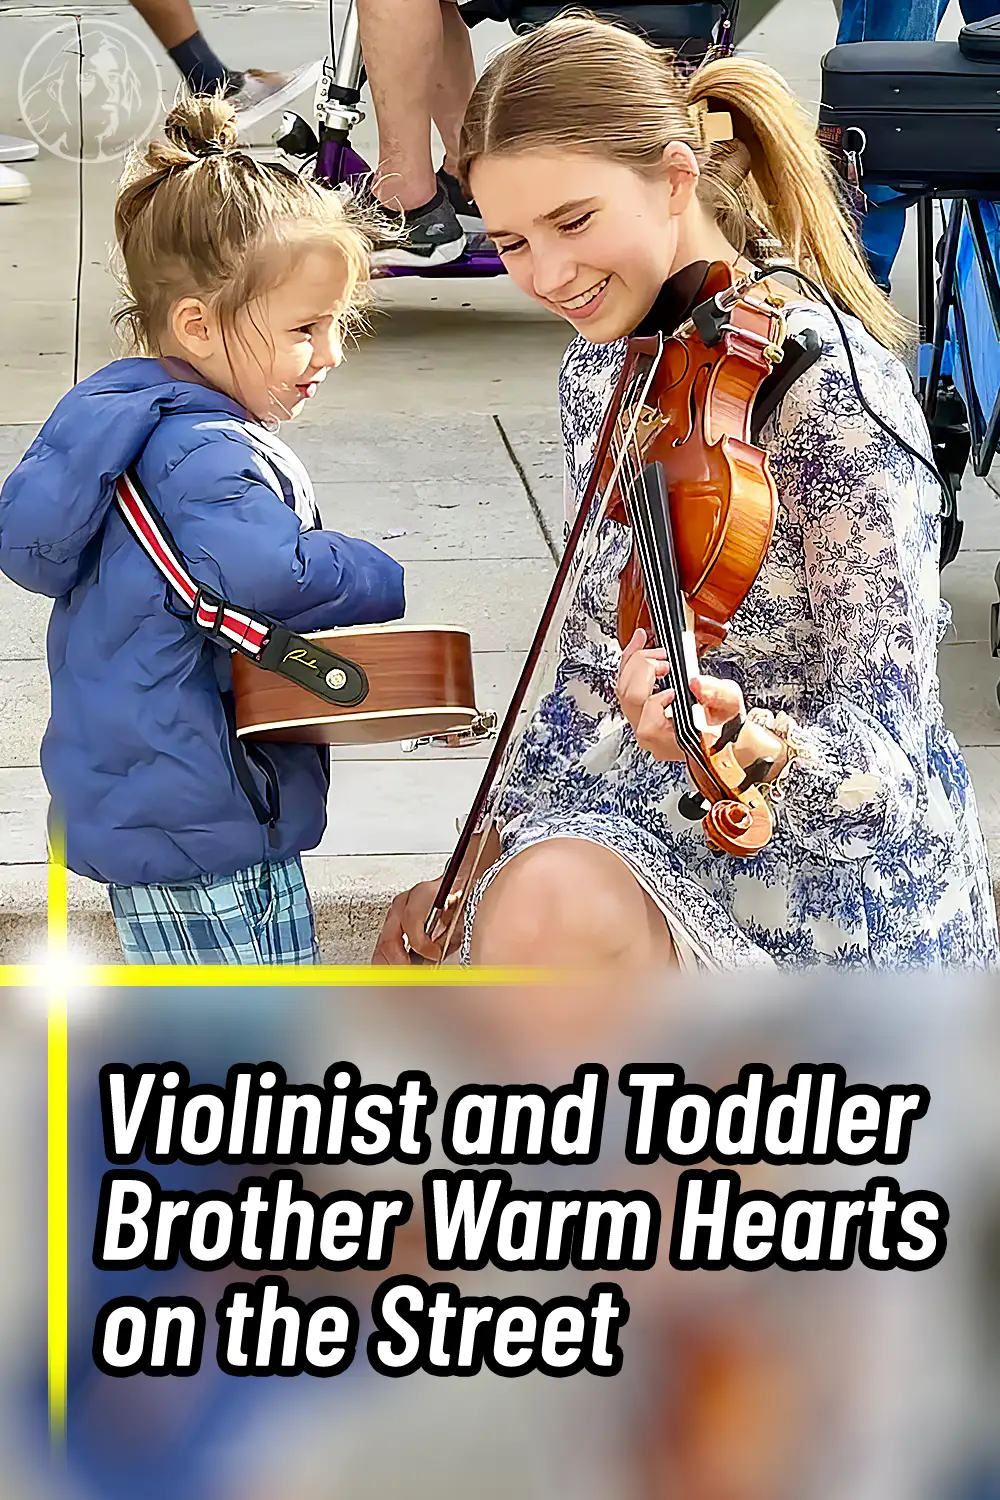 Violinist and Toddler Brother Warm Hearts on the Street